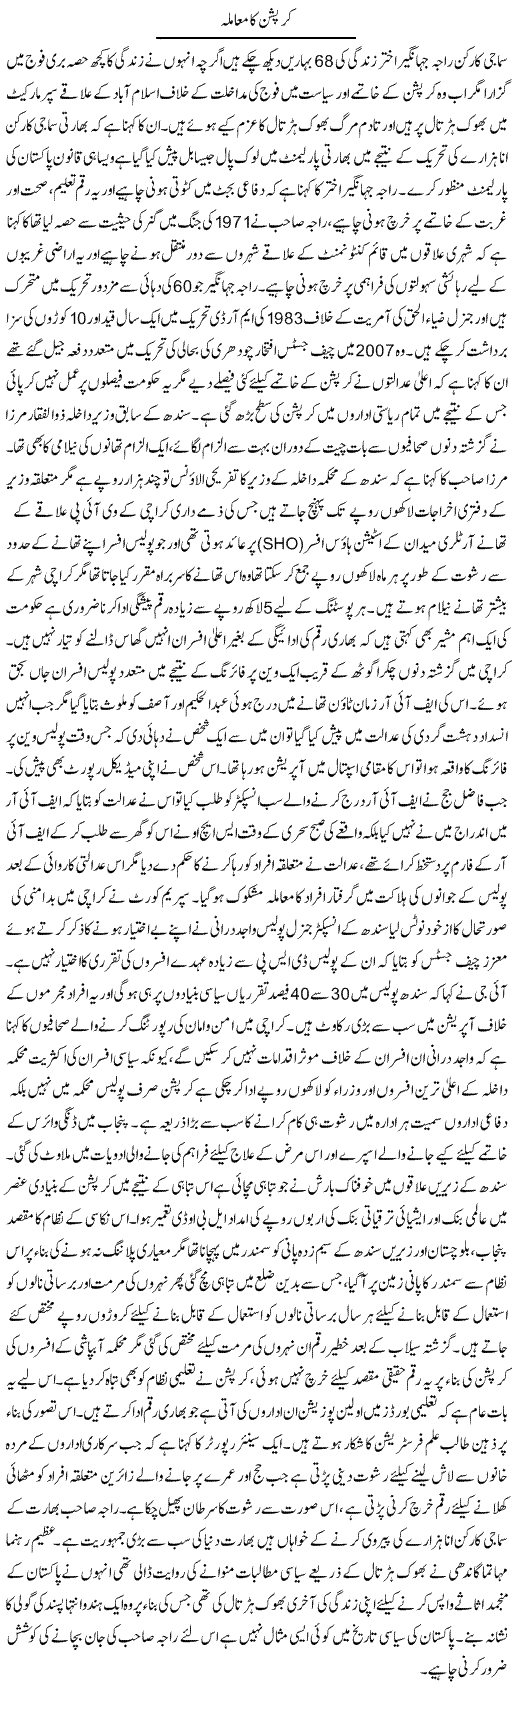 Issue of Corruption Express Column Tauseef Ahmed 14 September 2011